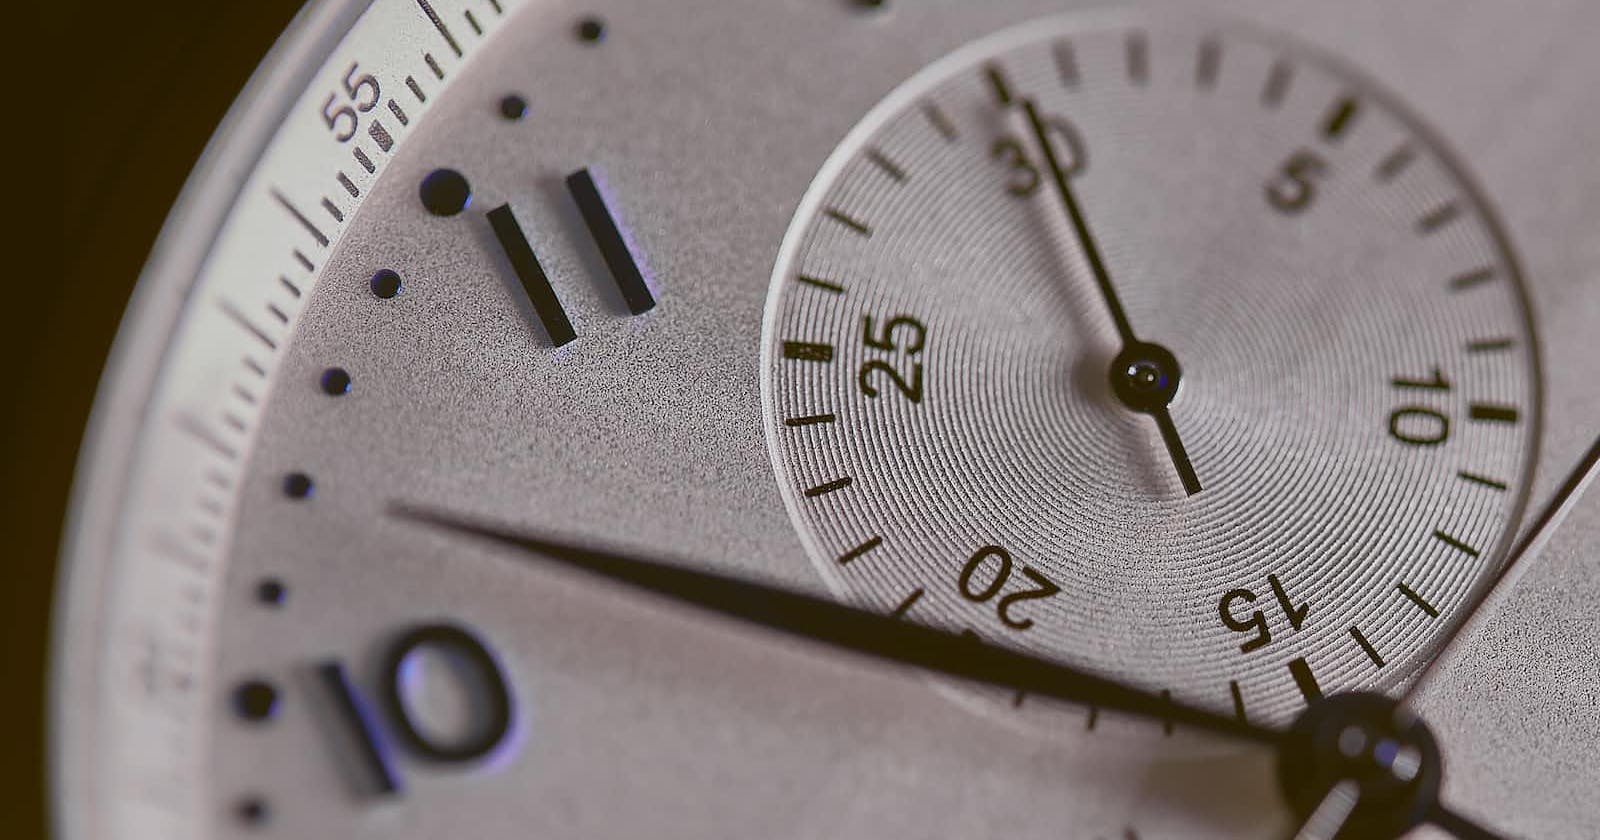 Time zone settings in Linux